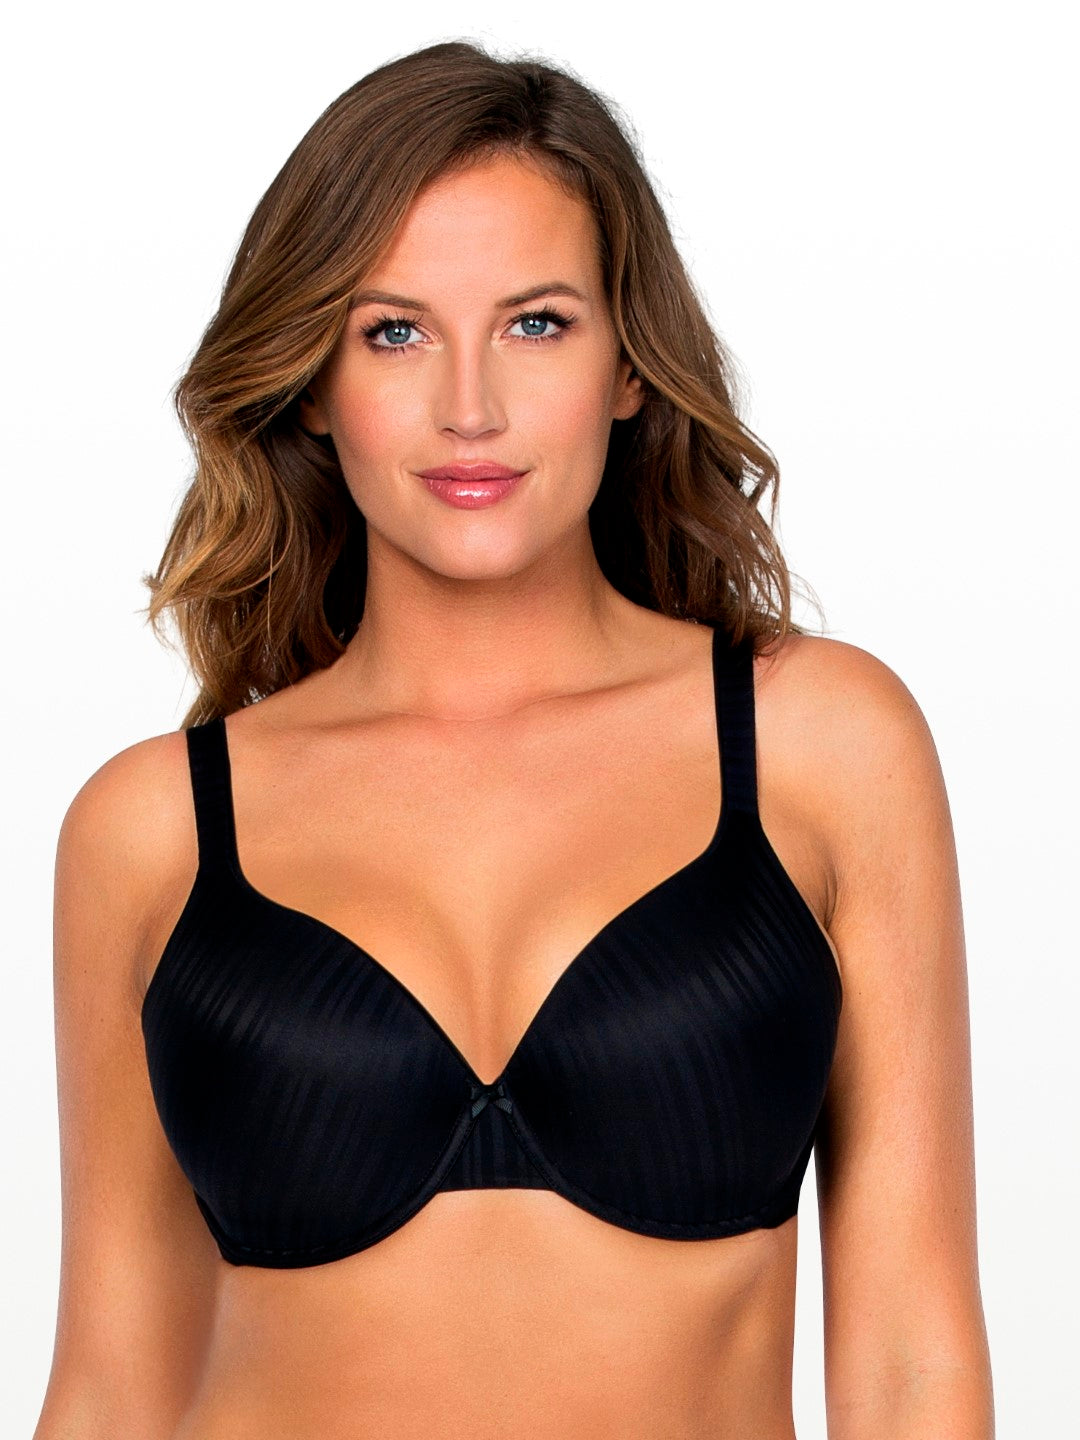 Buy Premium Quality F Size Bras From Parfait Lingerie's Collection